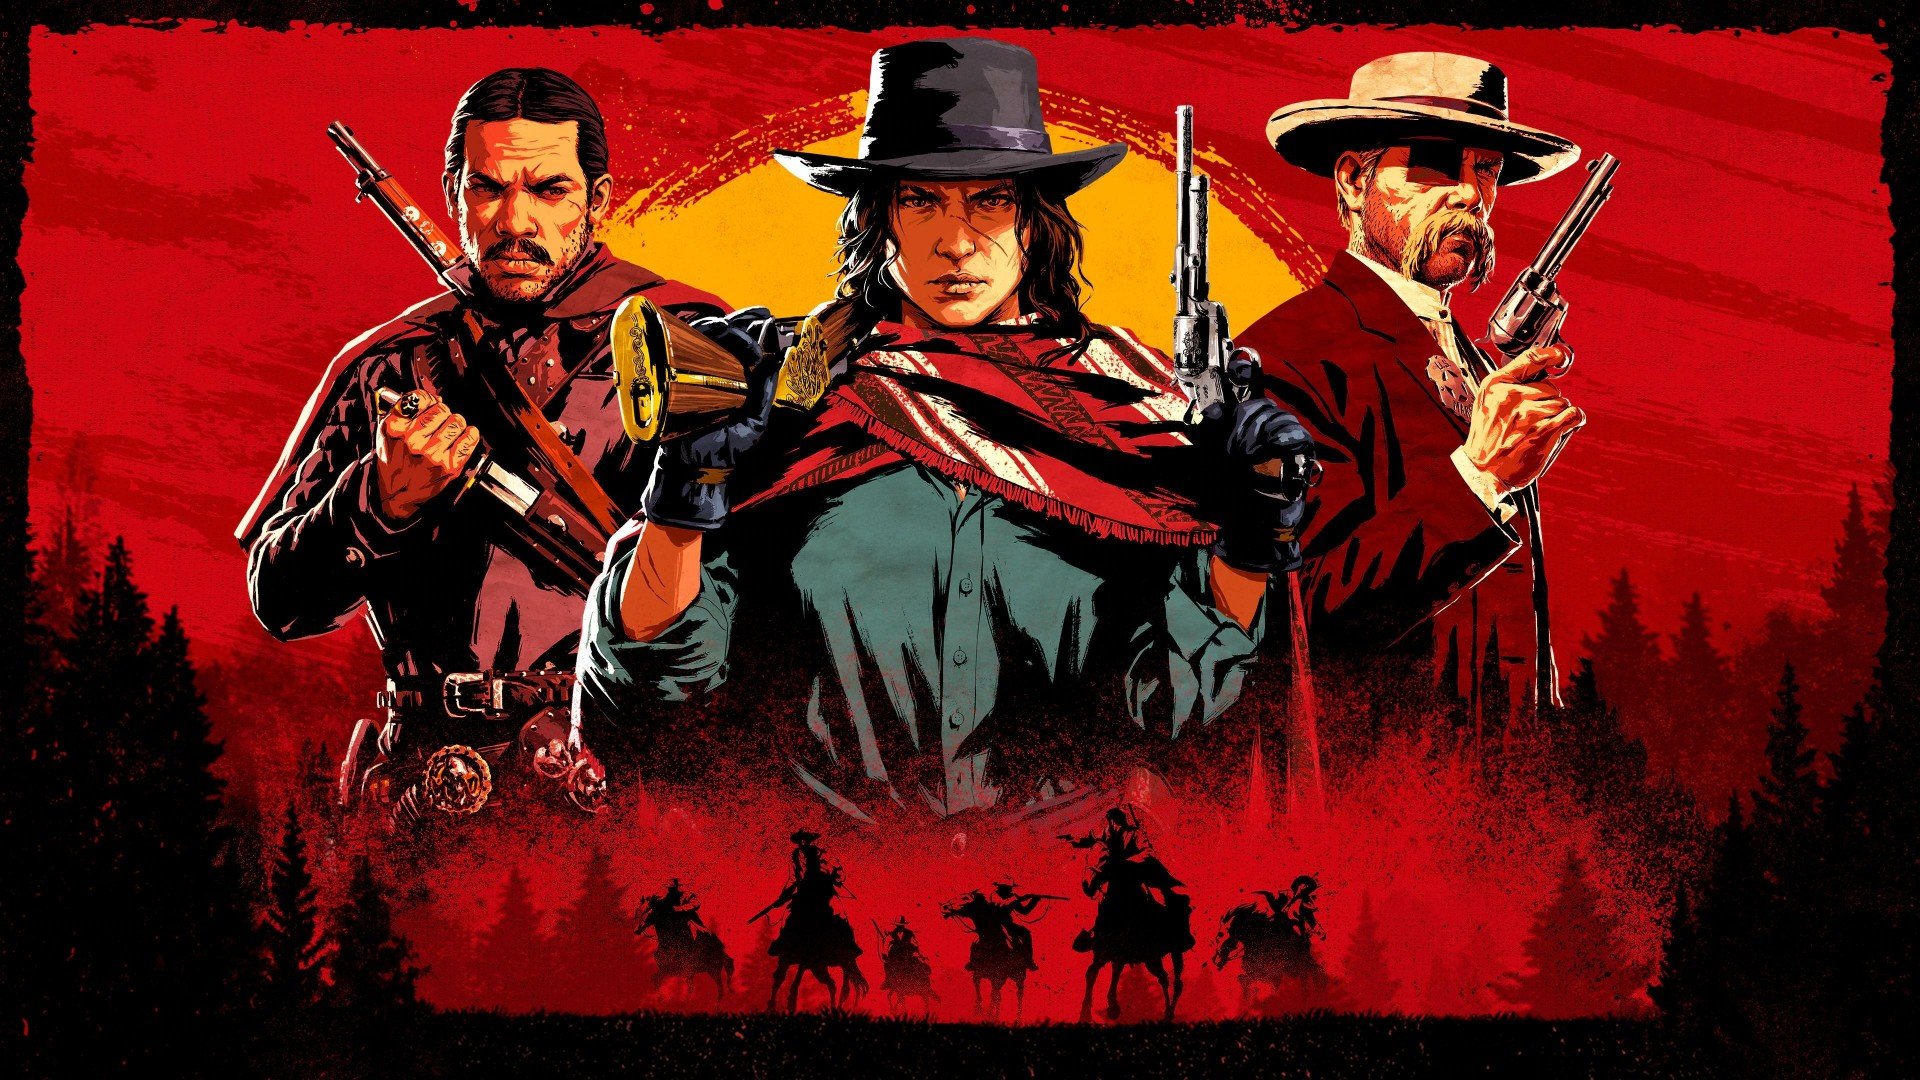 Рдр 2 плакат. Red Dead Redemption 2. Red Dead Redemption 2 обложка игры. Red Dead Redemption 2 Постер. Red Dead Redemption обложка.